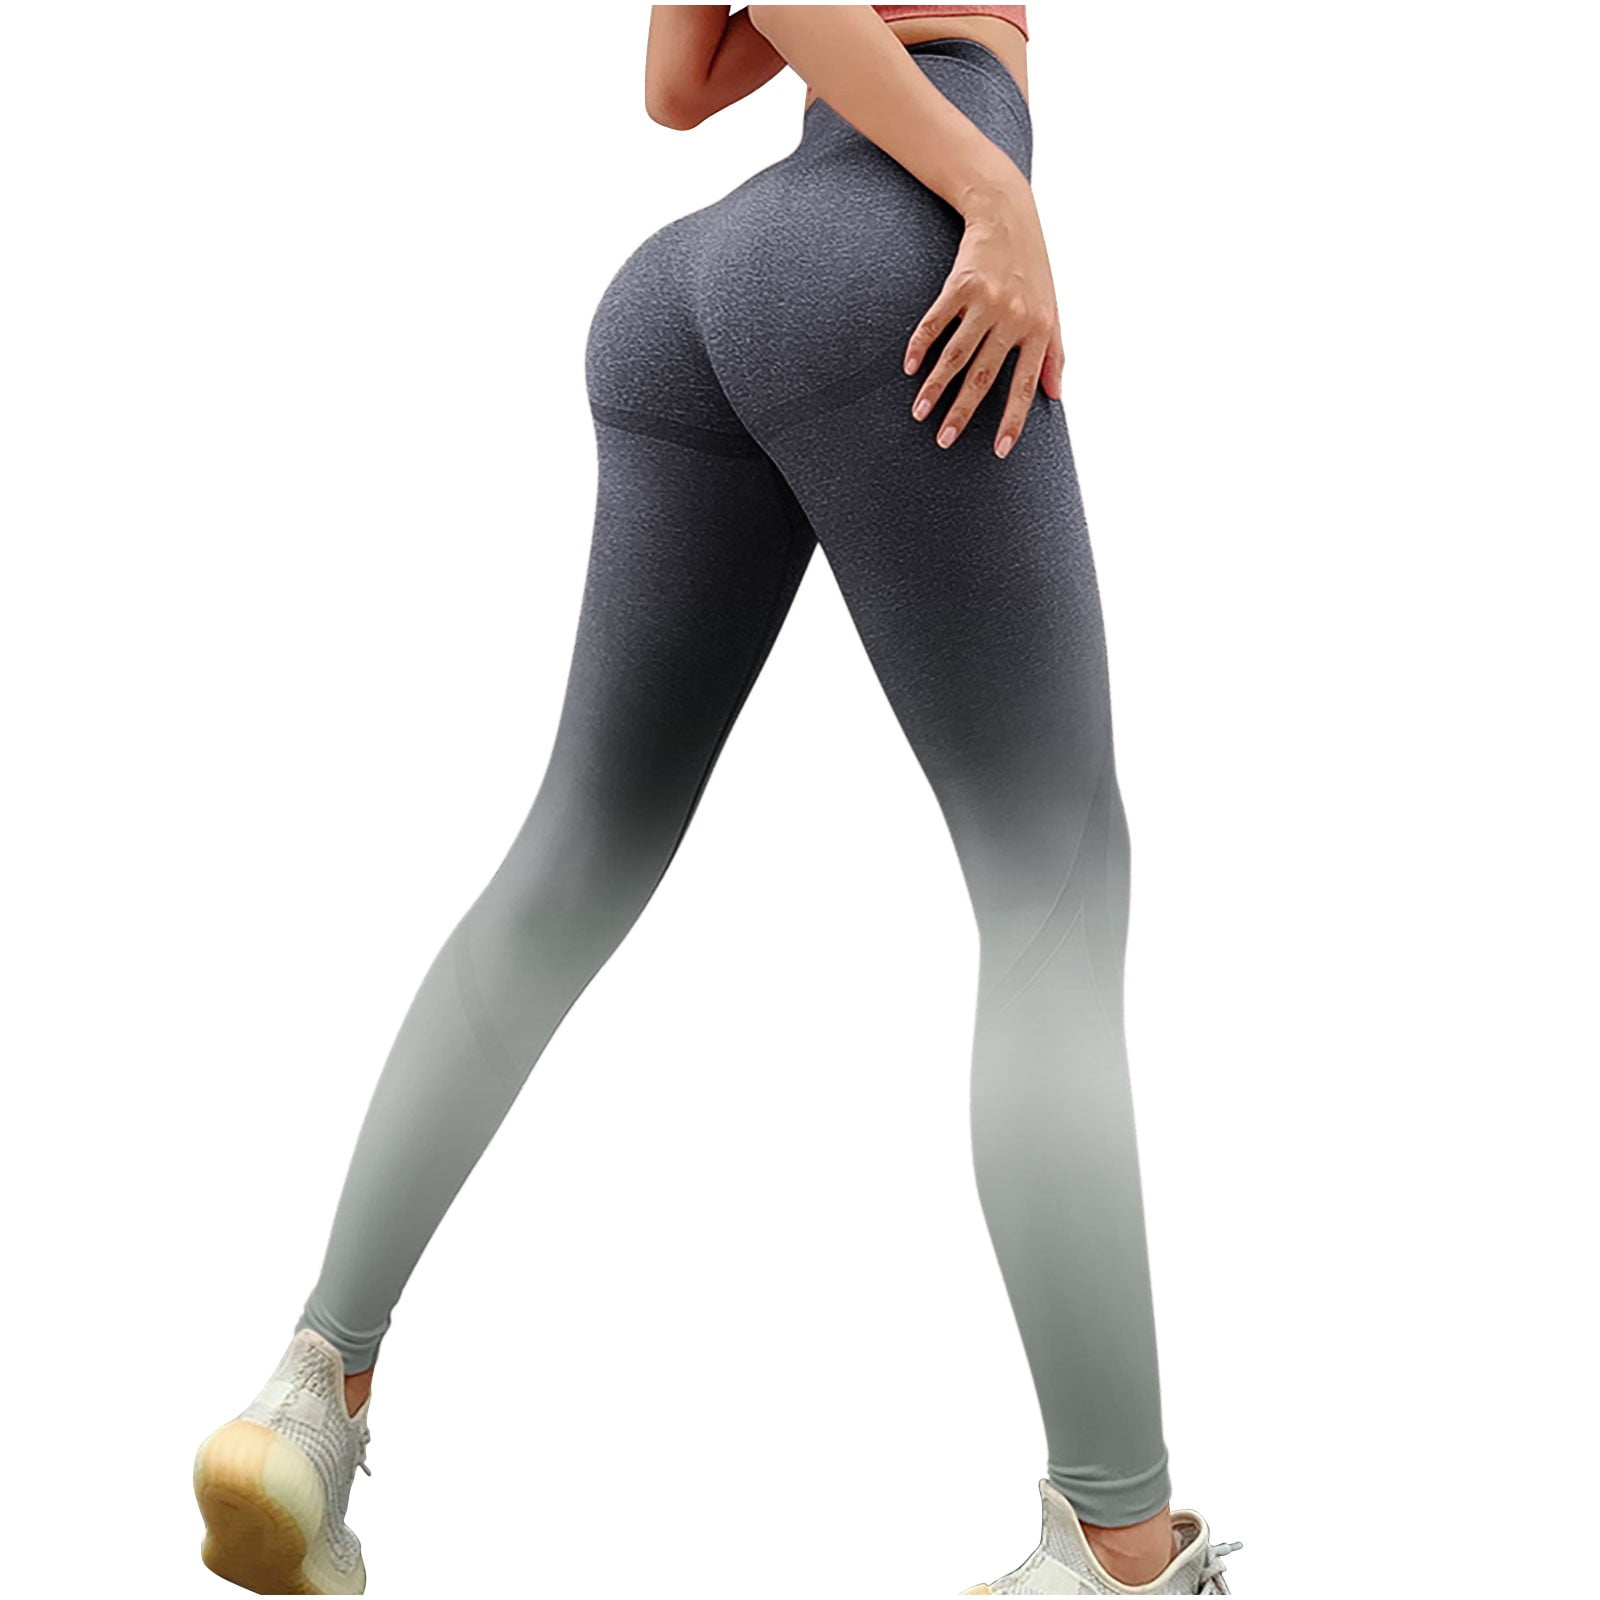 BLESS GYM WEAR - Dependable & Timeless: our Sexy Girls Tights Legging High  Quality Women Yoga Custom High Waisted New Seamless Leggings embraces  advanced manufacturing techniques and elevated performance. Learn more: Sexy